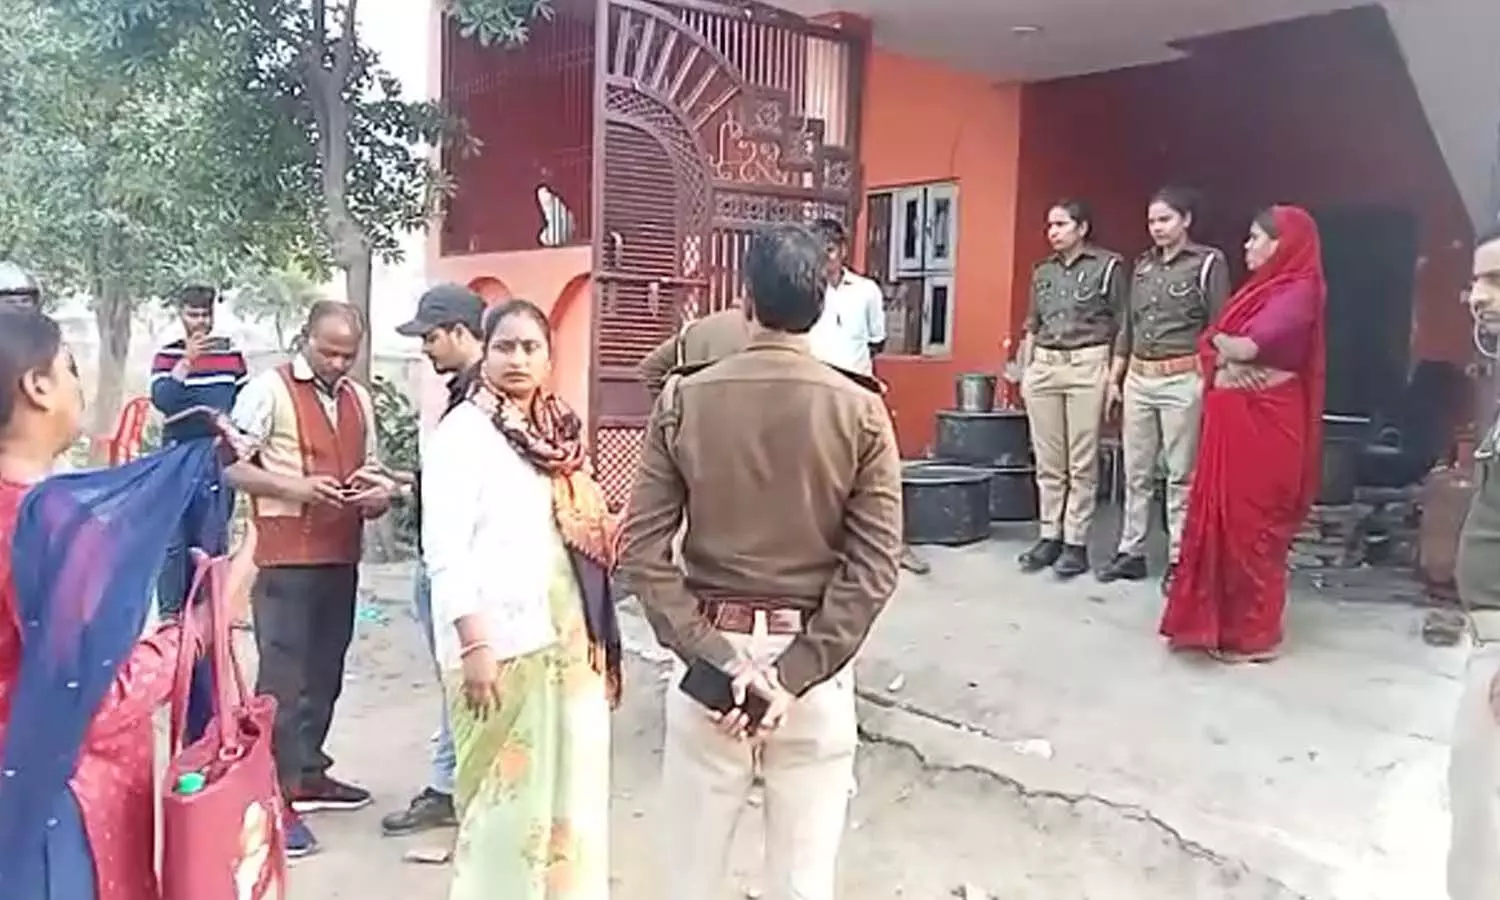 Brother protested against child marriage in Aligarh, then the police closed the police station